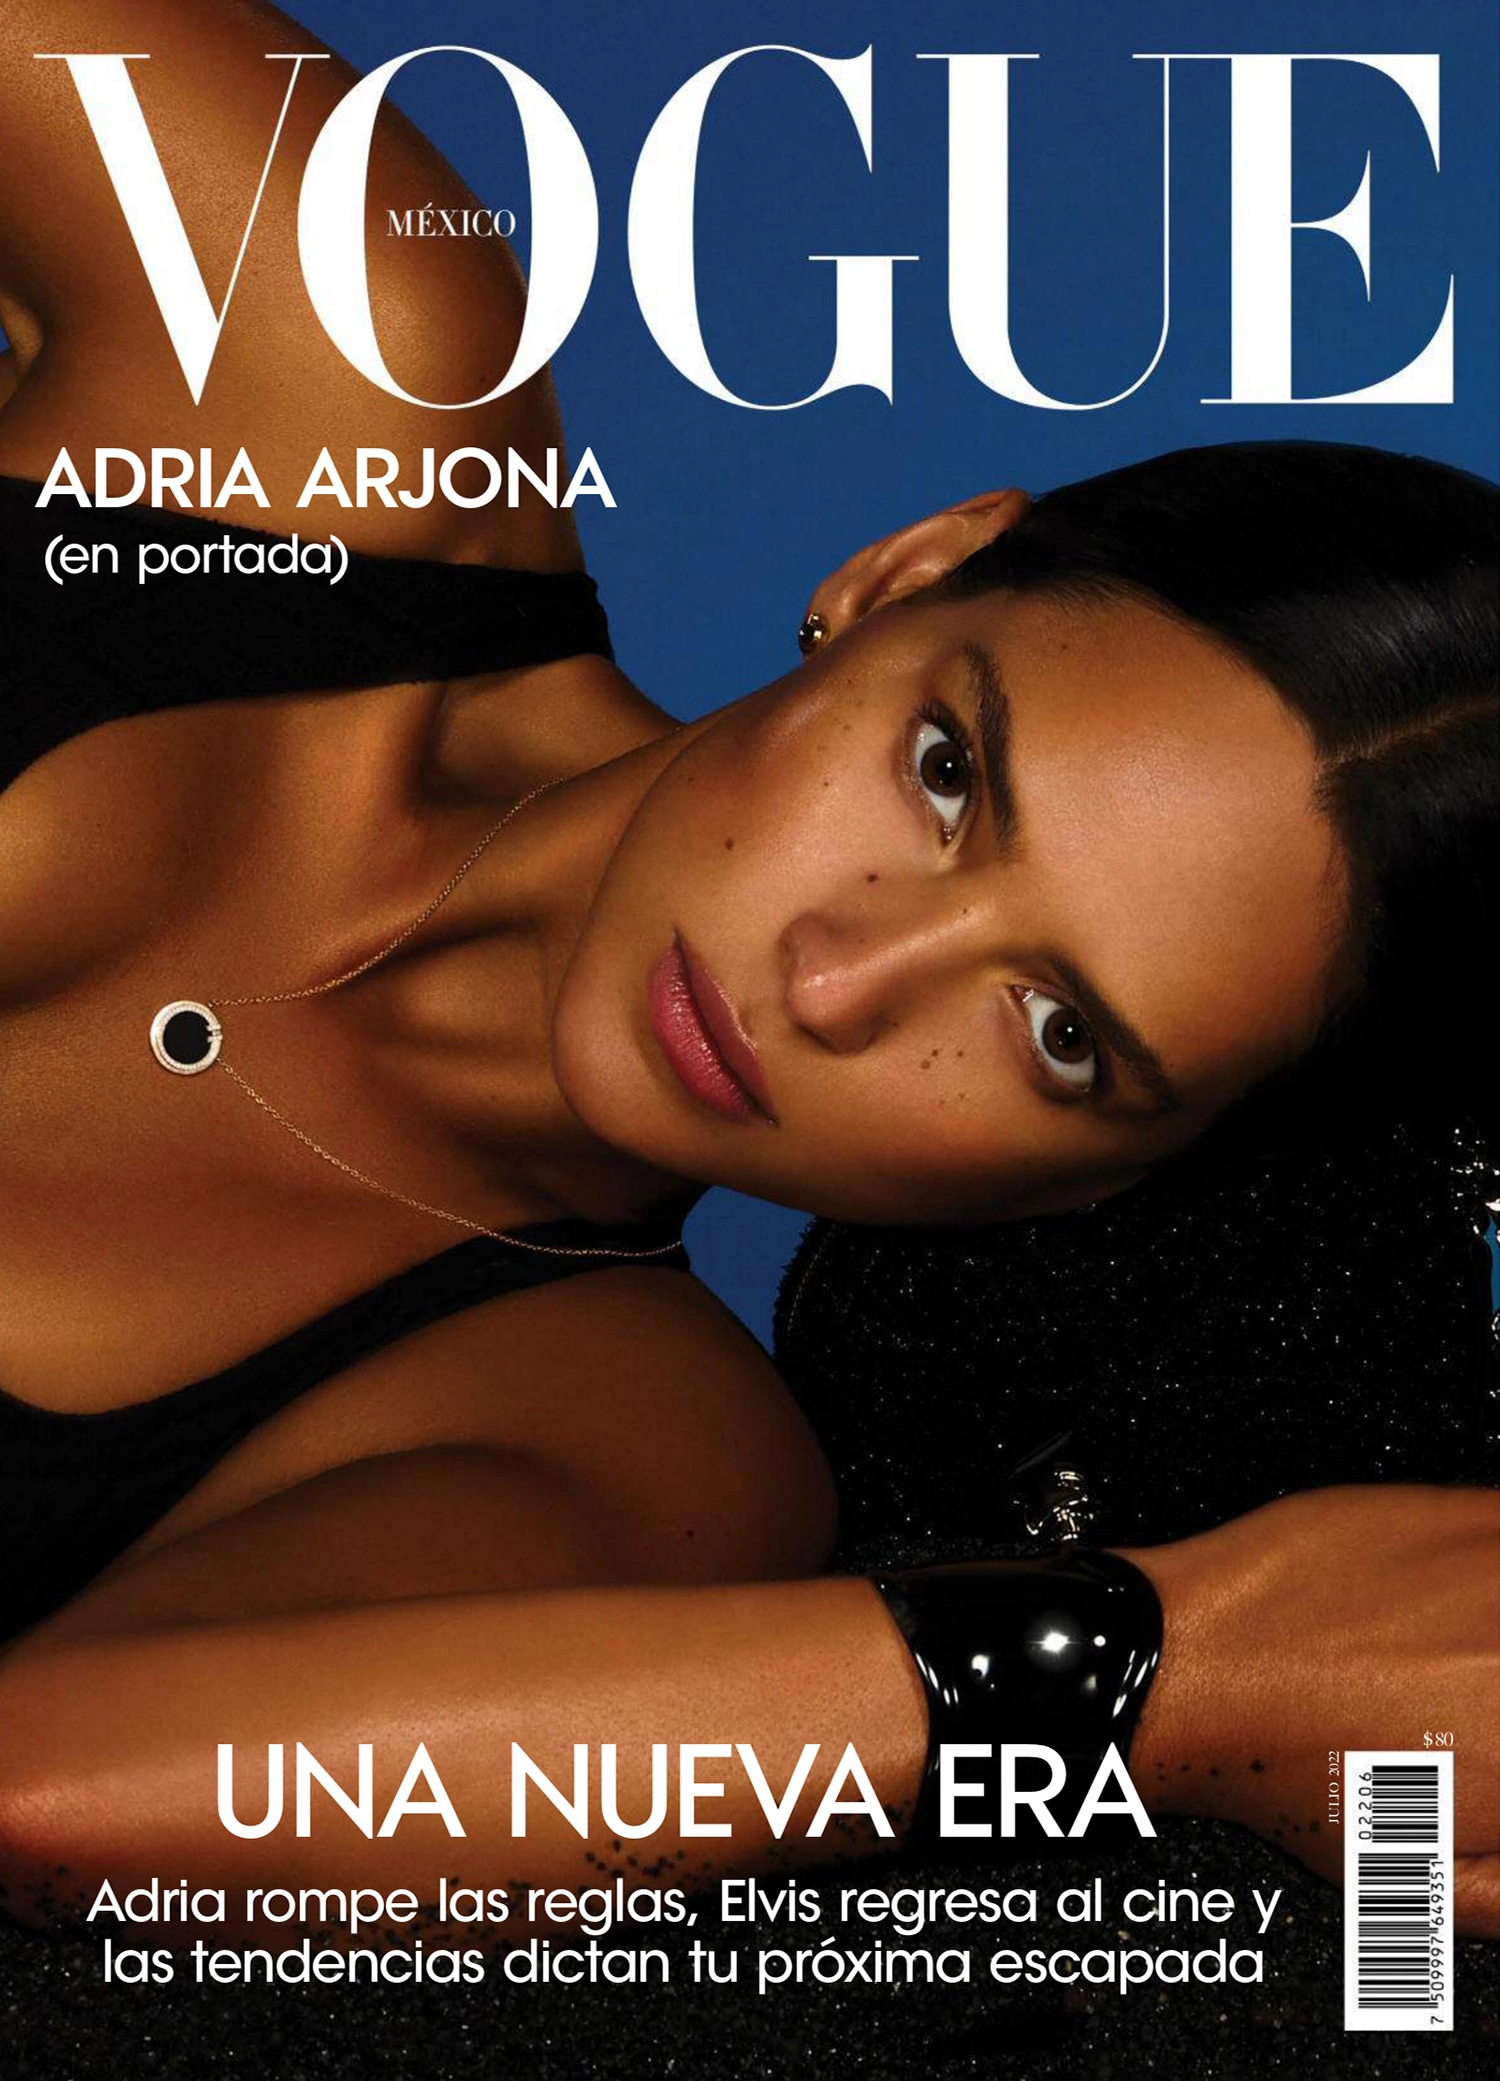 Adria Arjona covers Vogue Mexico & Latin America July 2022 by Brye ...